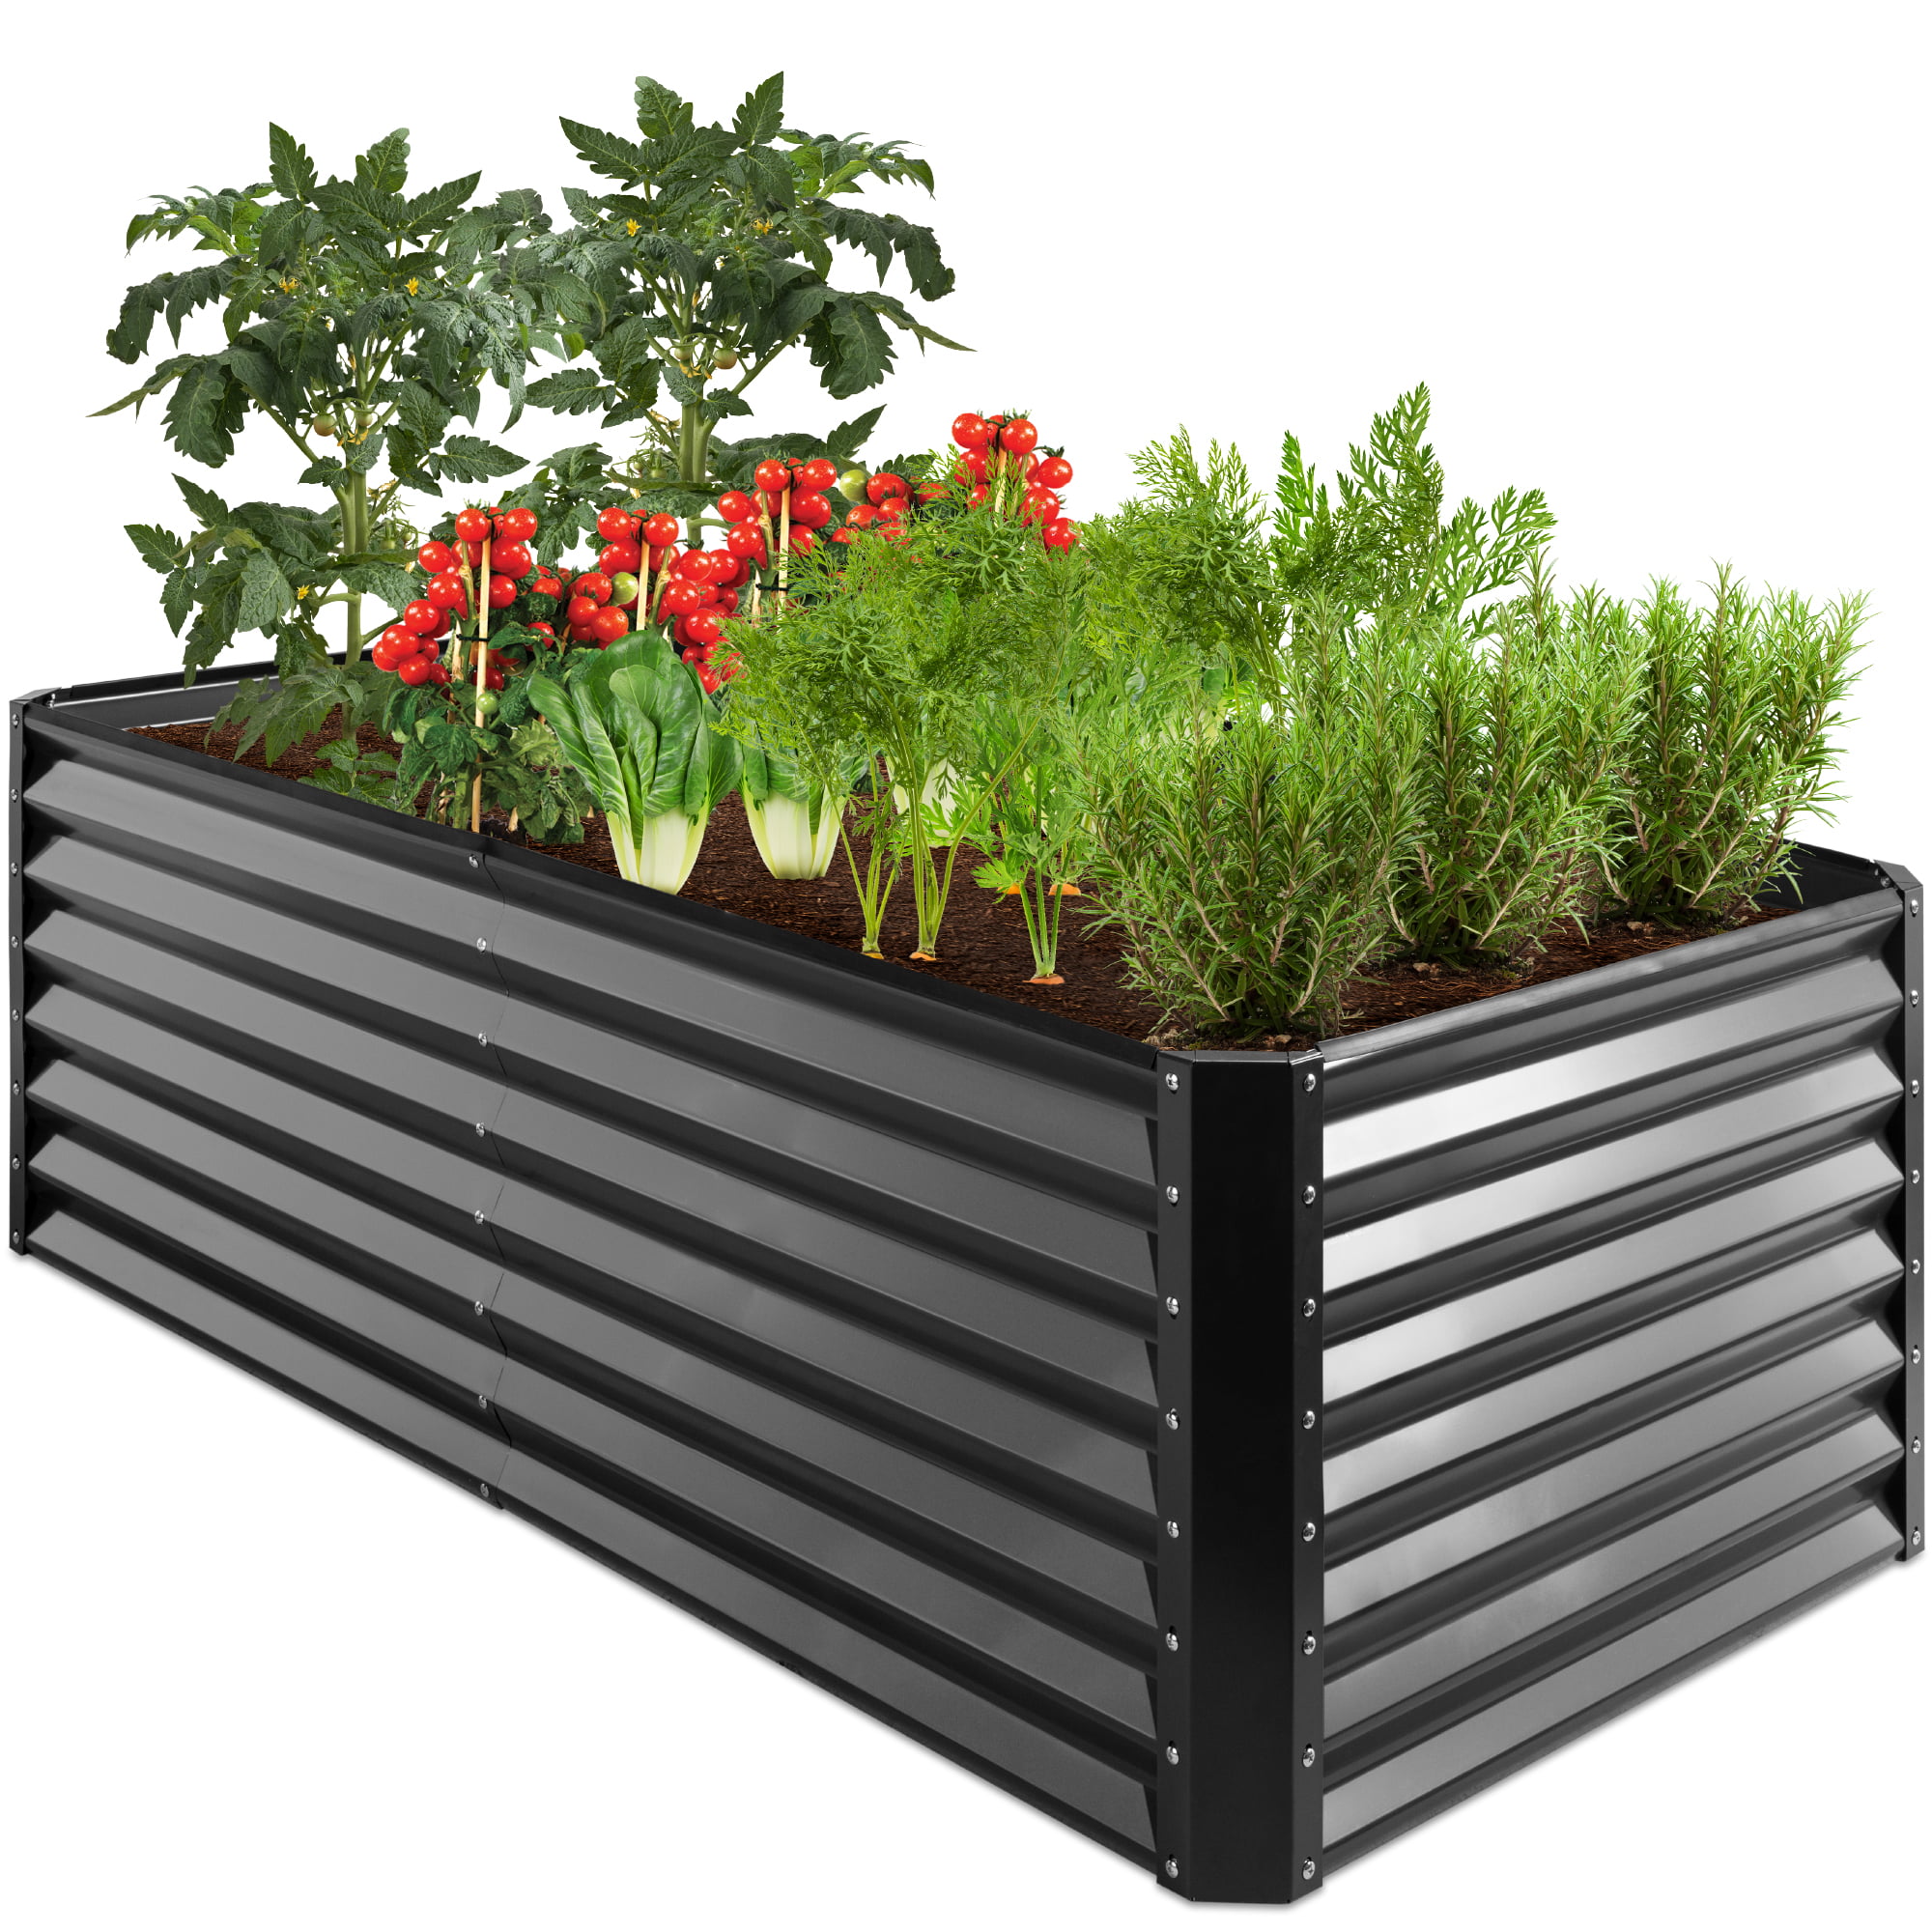 Vegetables Flowers Herbs, Is Corrugated Metal Safe For Raised Garden Beds